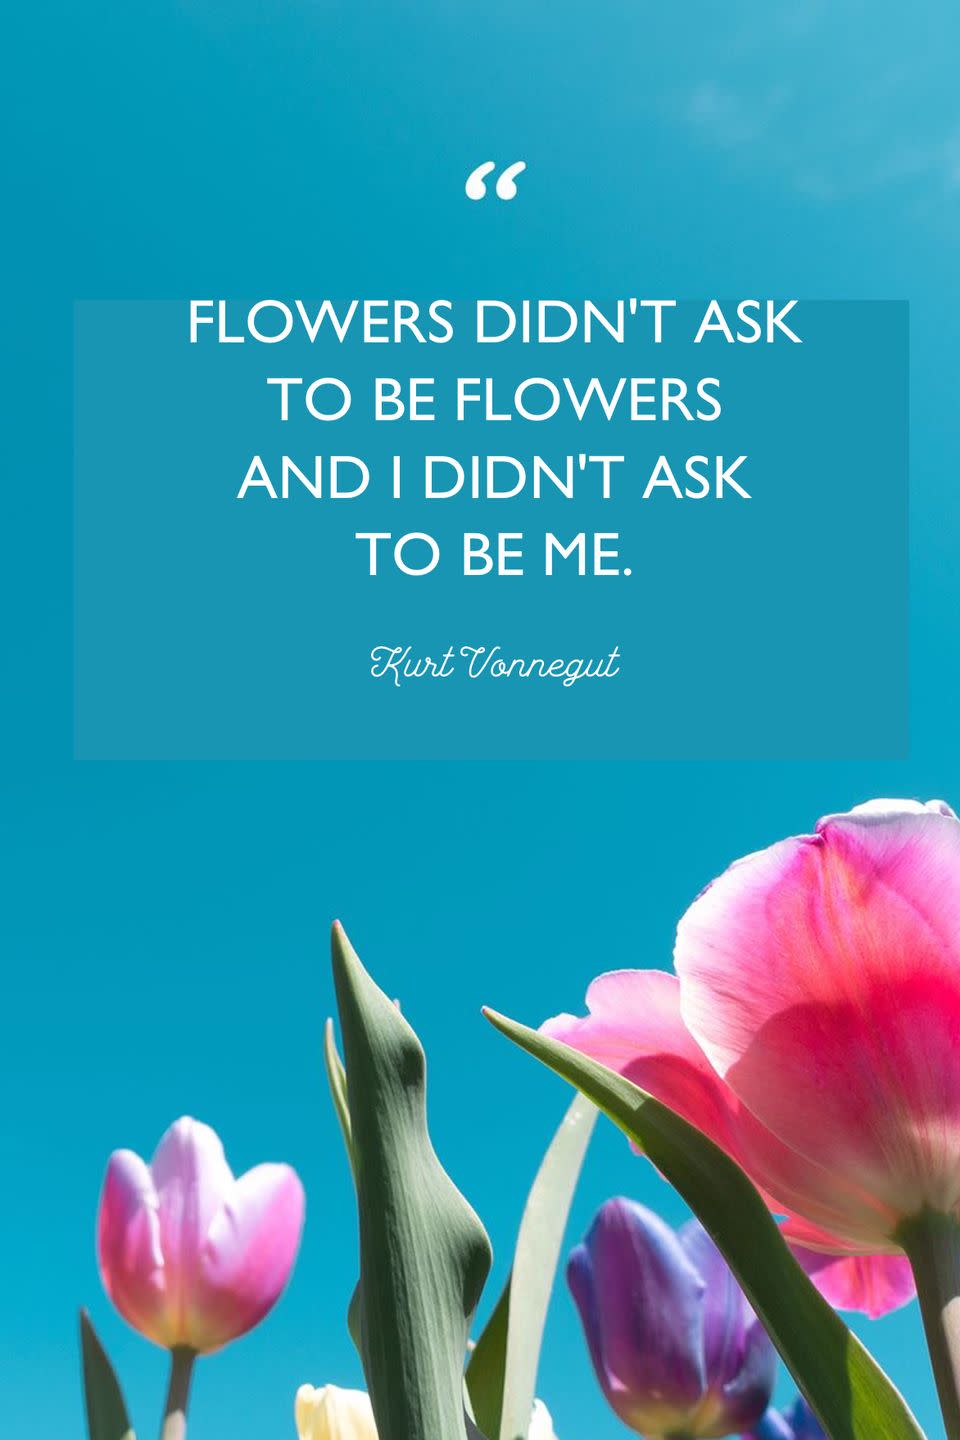 <p>"Flowers didn't ask to be flowers and I didn't ask to be me."</p>